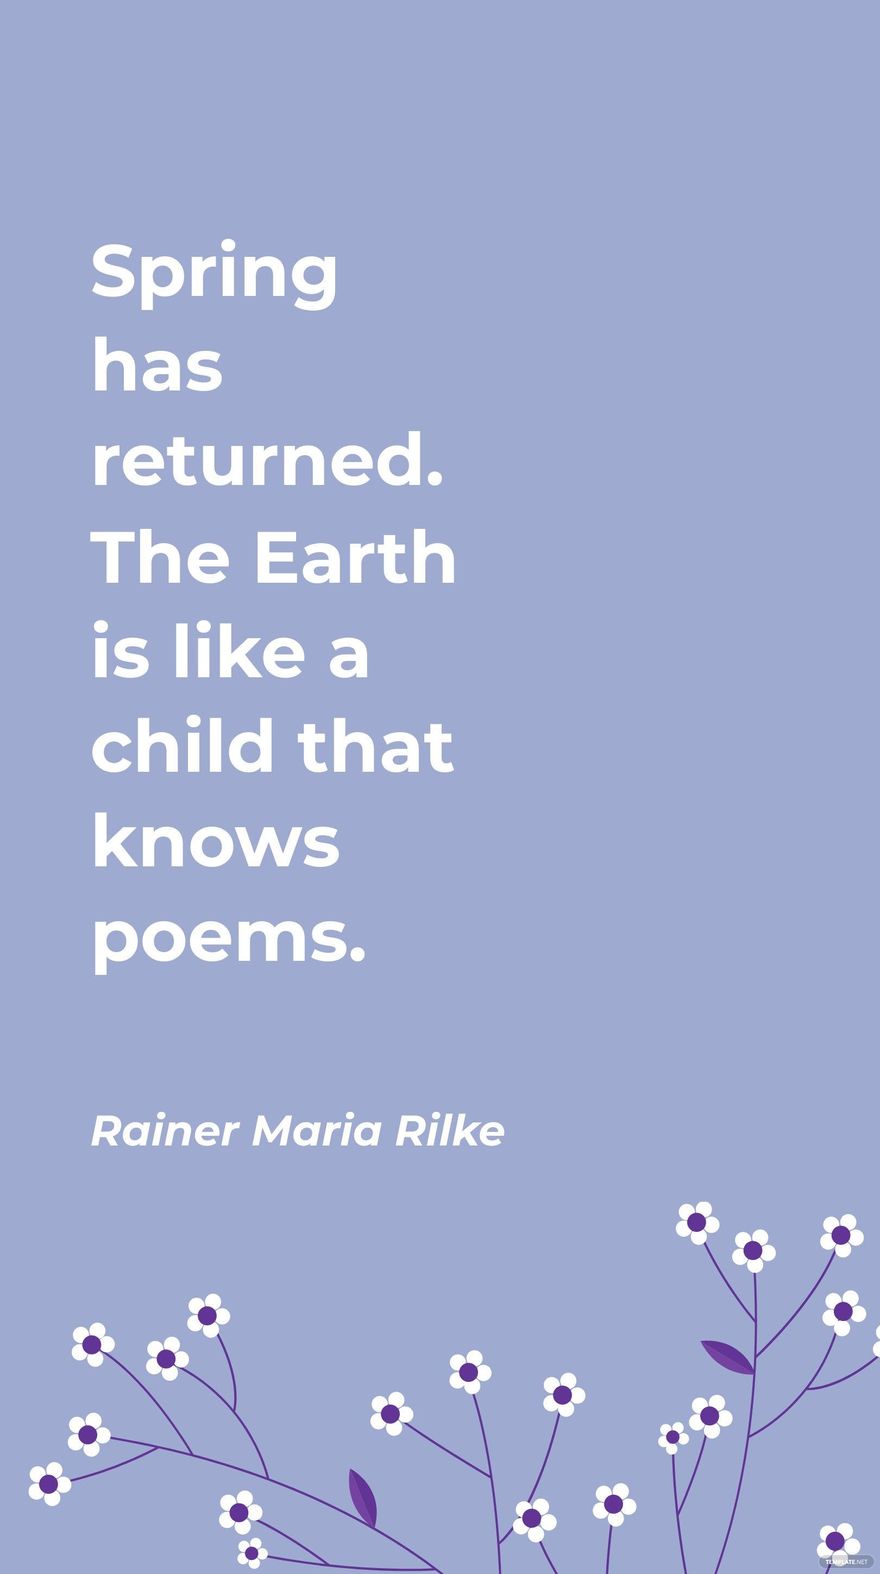 Rainer Maria Rilke - Spring has returned. The Earth is like a child that knows poems. in JPG